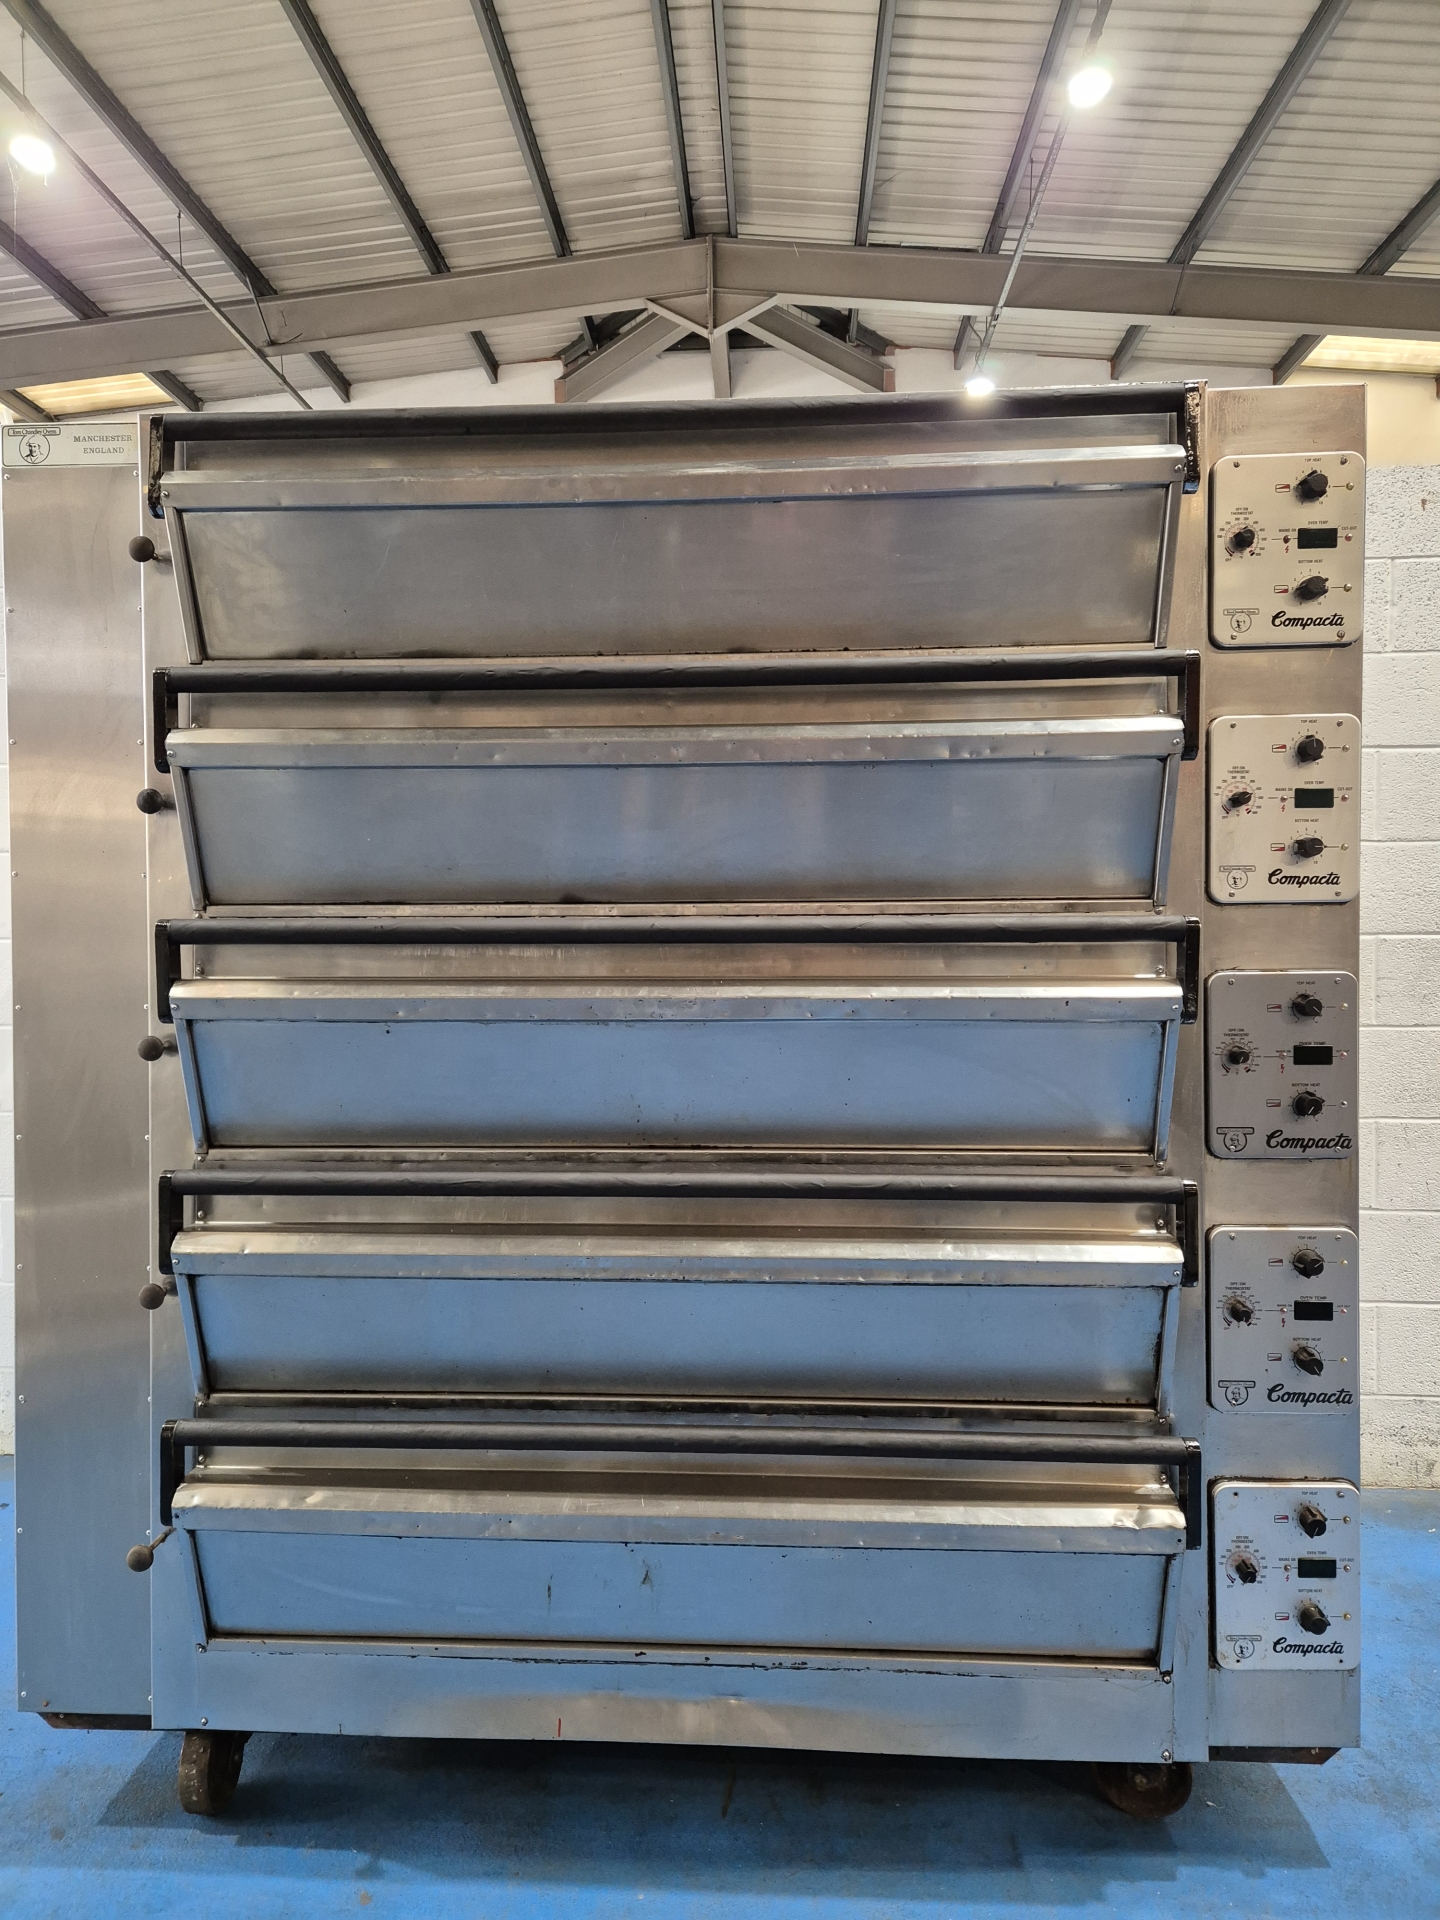 Tom Chandley 15 Tray (18" x 30" Trays) Deck Oven